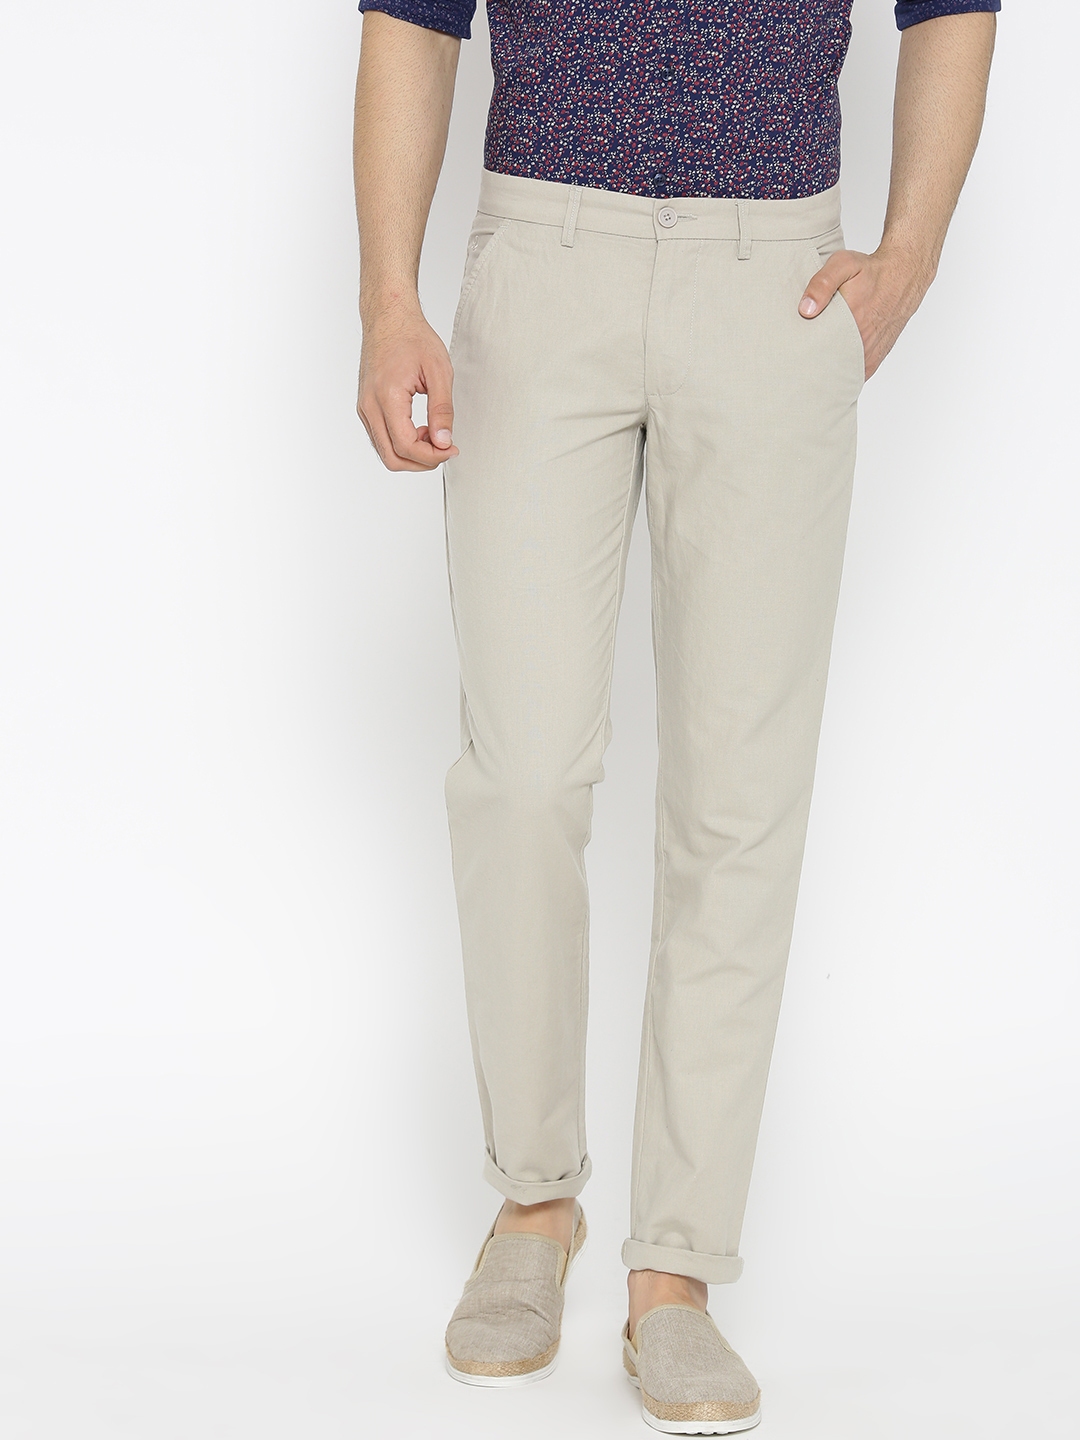 Buy United Colors Of Benetton Men Beige Slim Fit Self Design Trousers   Trousers for Men 6581909  Myntra